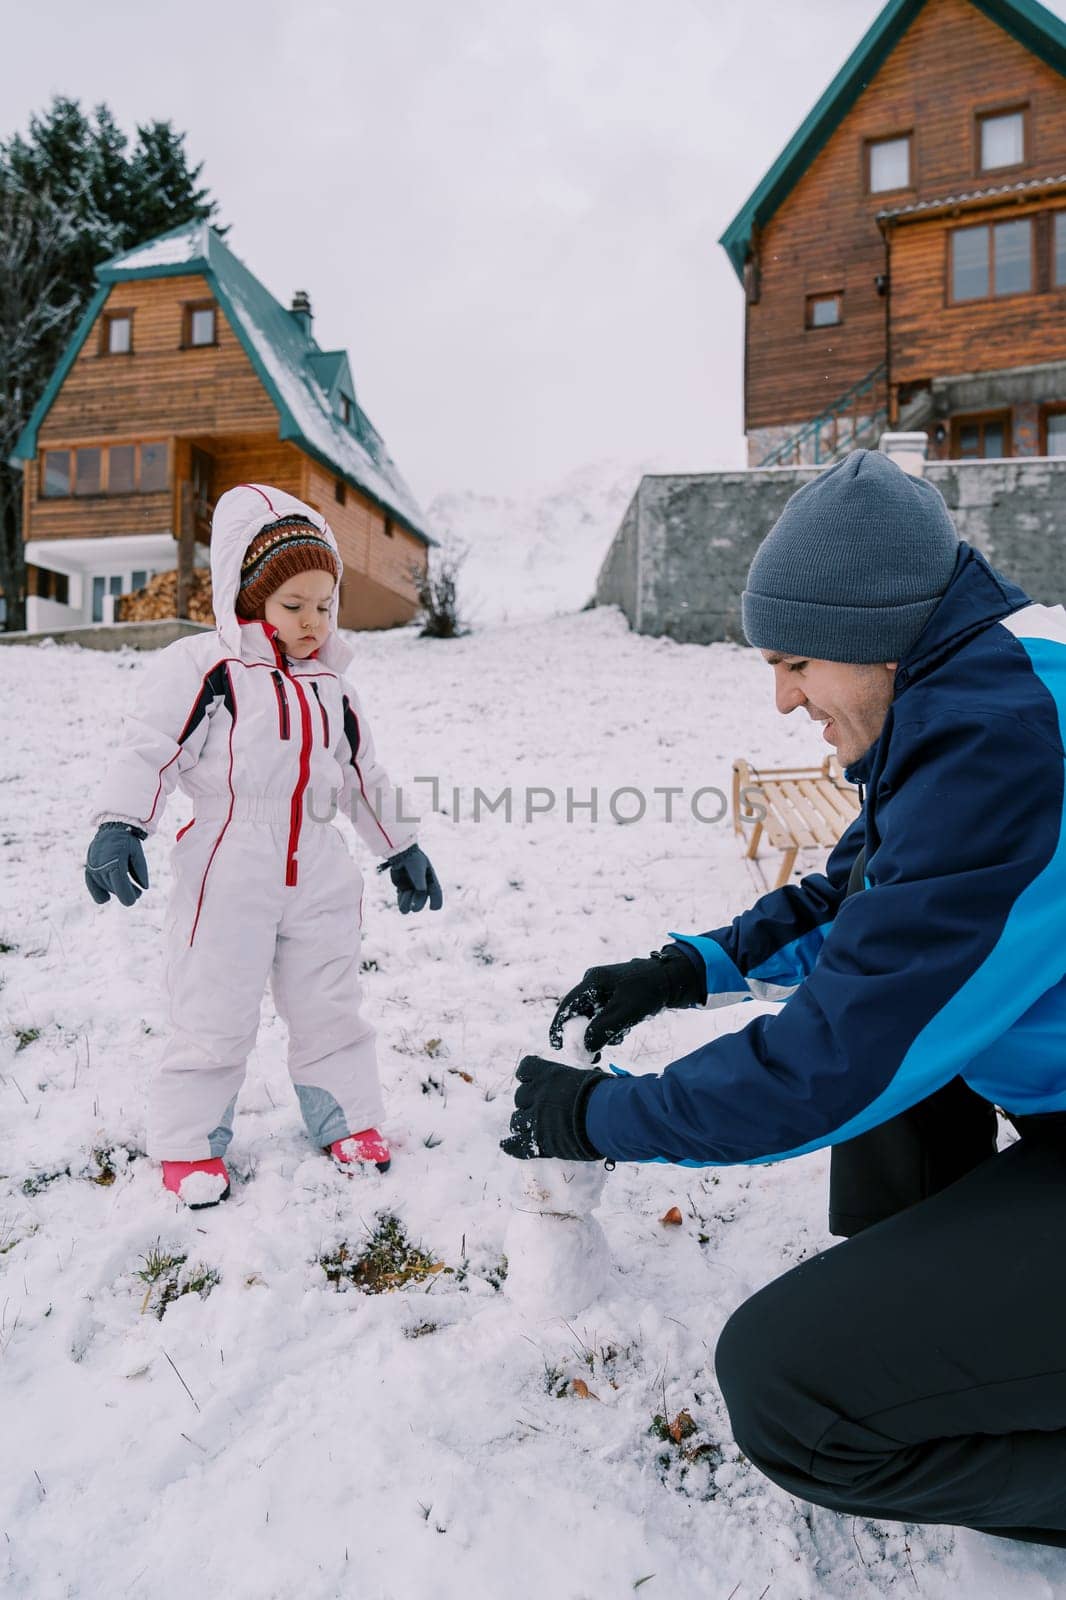 Little girl looks at her dad making a little snowman in the yard of a wooden cottage. High quality photo